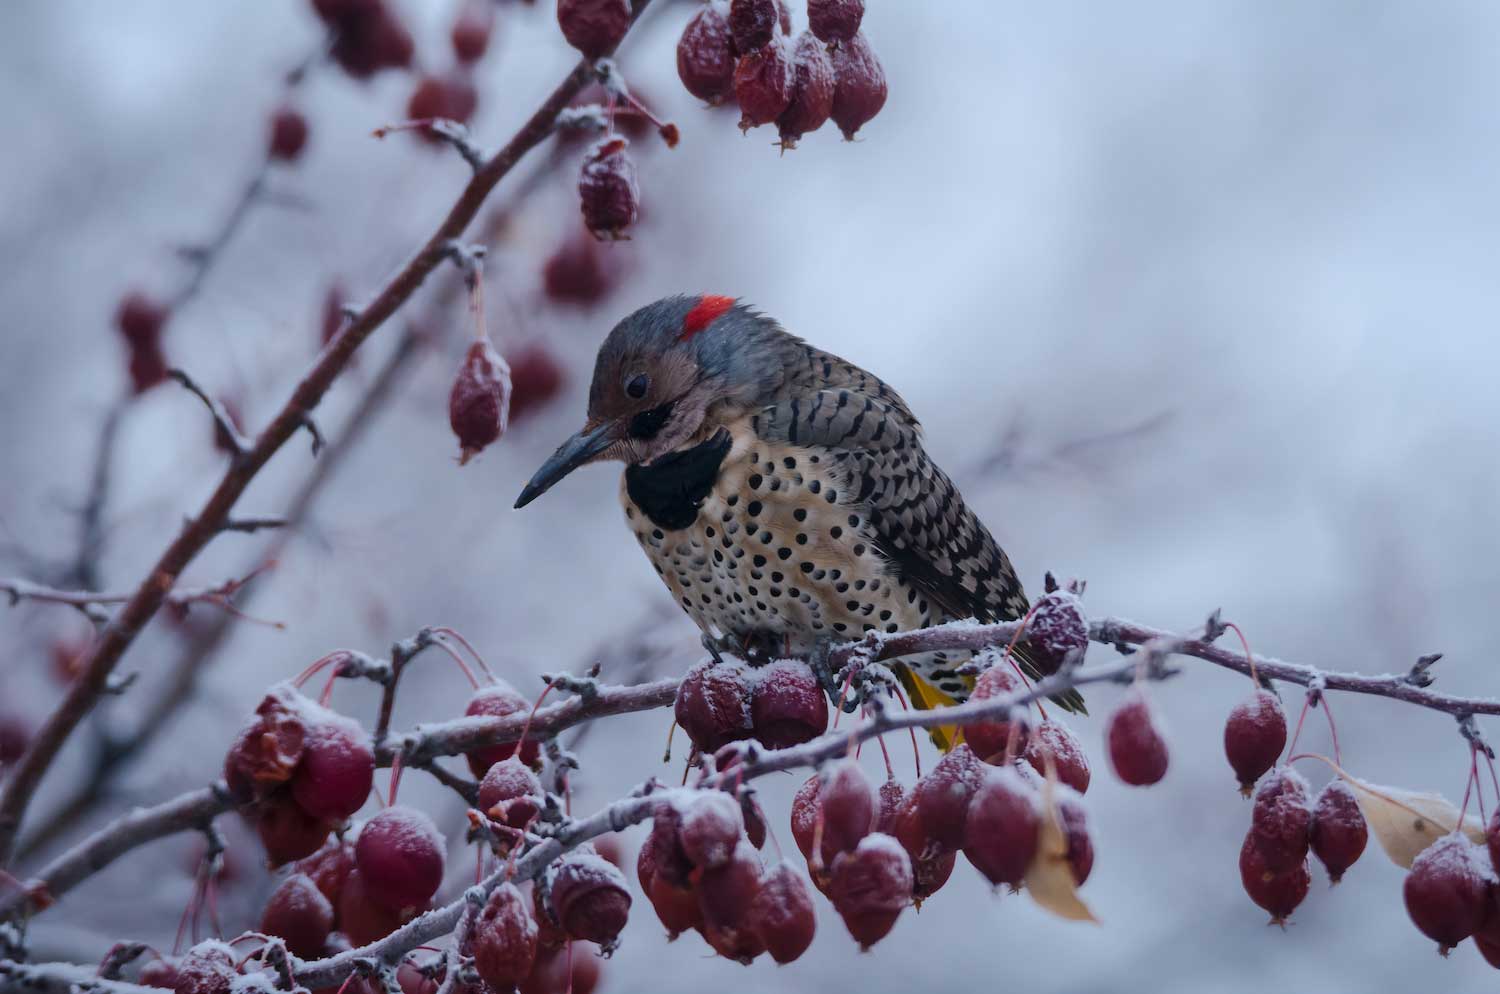 A northern flicker sitting in the branches of a crabapple tree dusted with snow.